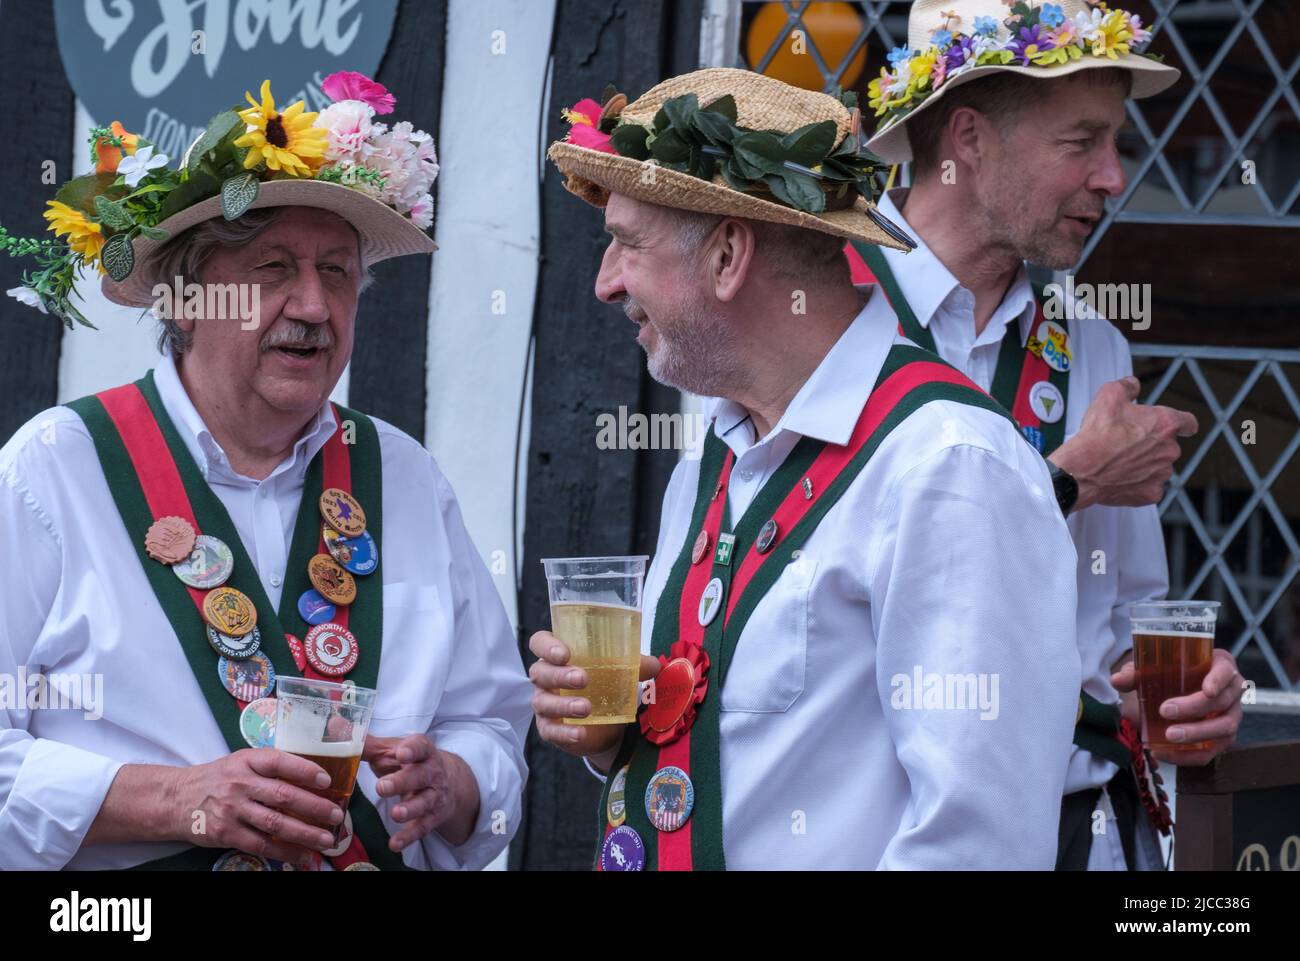 Merrydowners Morris dancers drink beer and socialise outside during St George’s Day Celebration 2022, Pinner, Northwest London Stock Photo